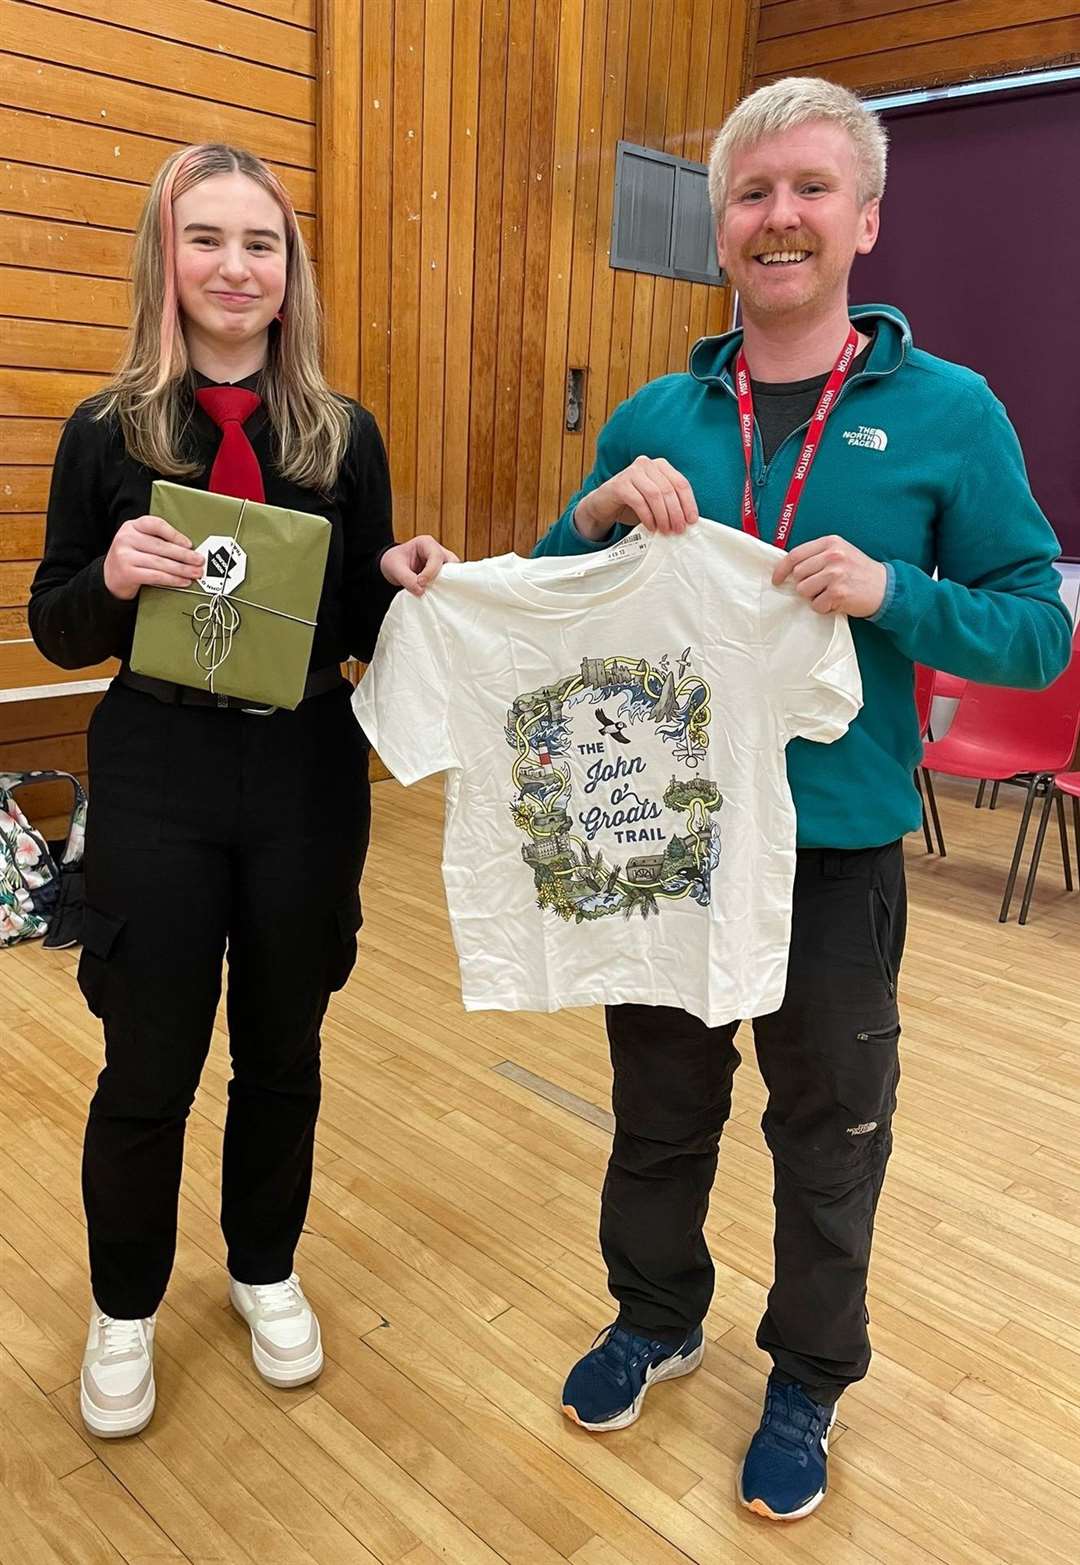 John O’Groats Trail manager Ken McElroy presents winner Lola Greaves with the new John O’Groats Trail t-shirt.